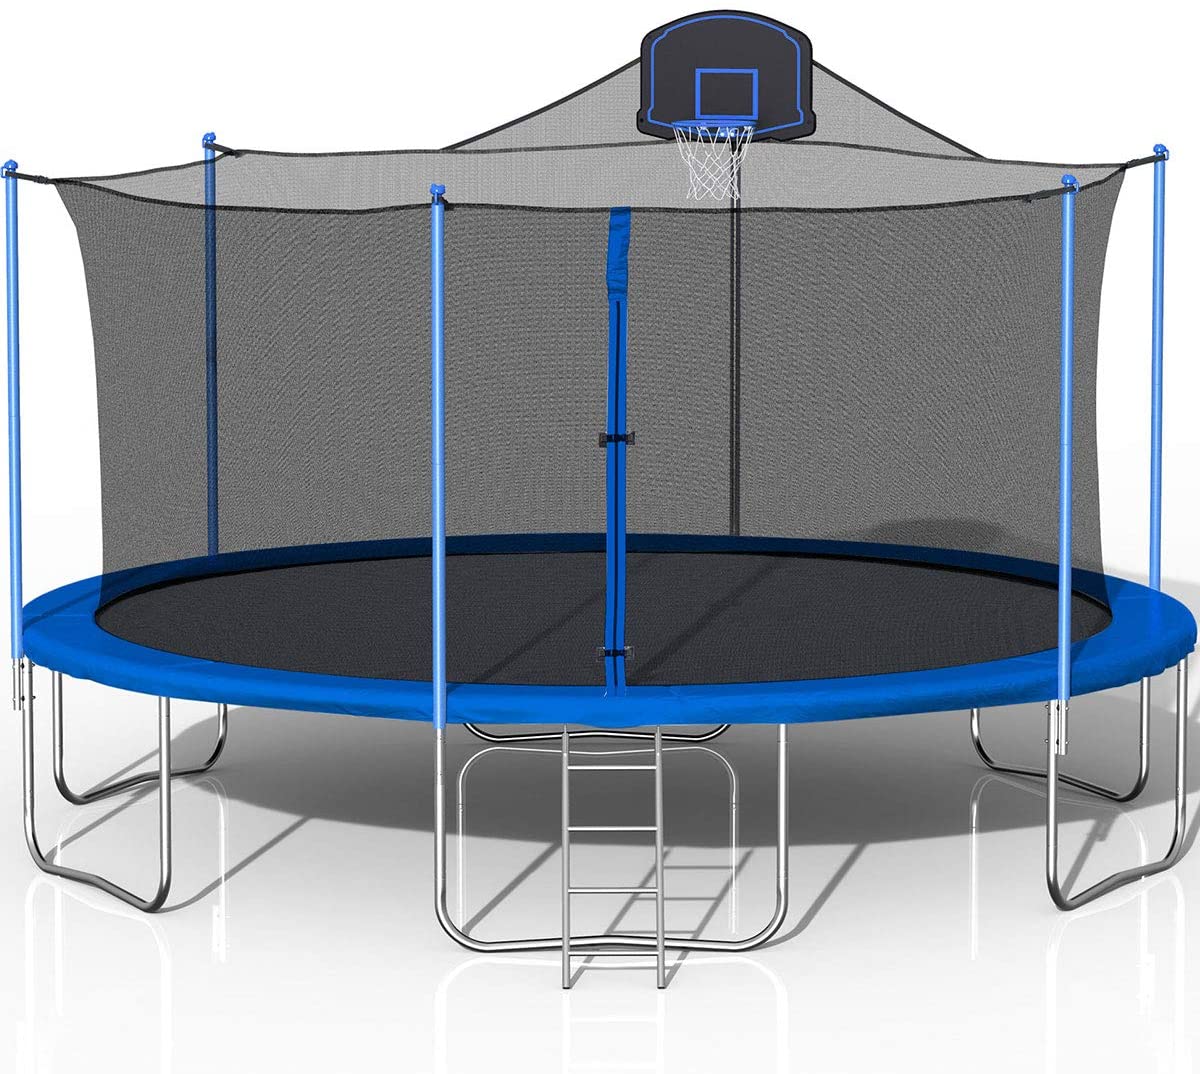 Merax 16FT Trampoline with Safety Enclosure Net, Basketball Hoop and Ladder, for Kids